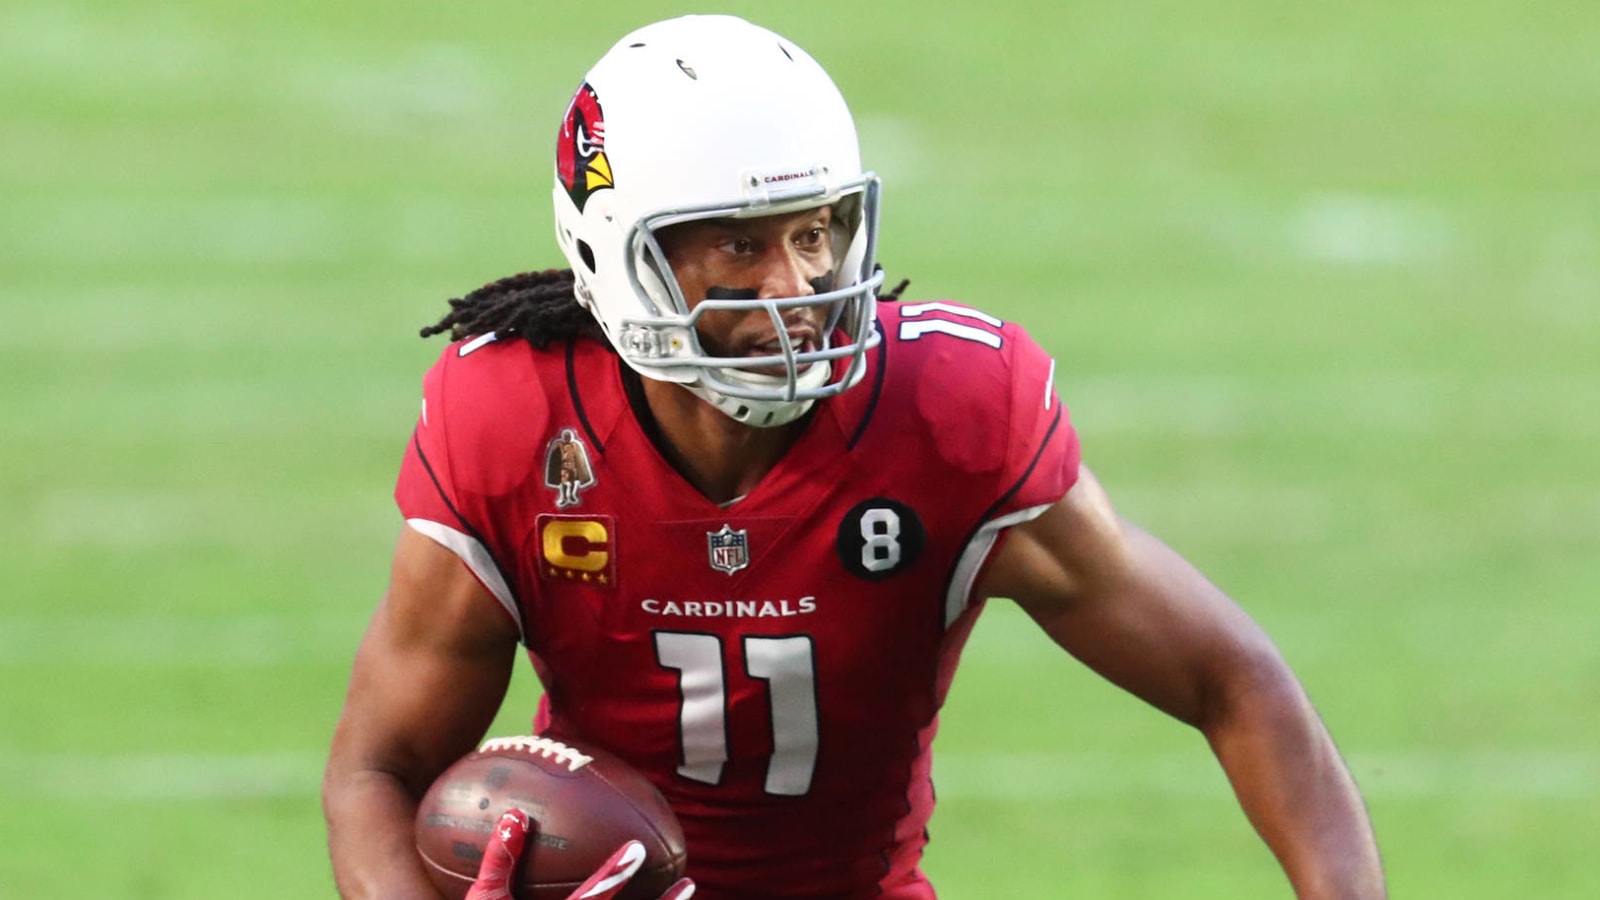 Larry Fitzgerald undecided on 2021 playing status